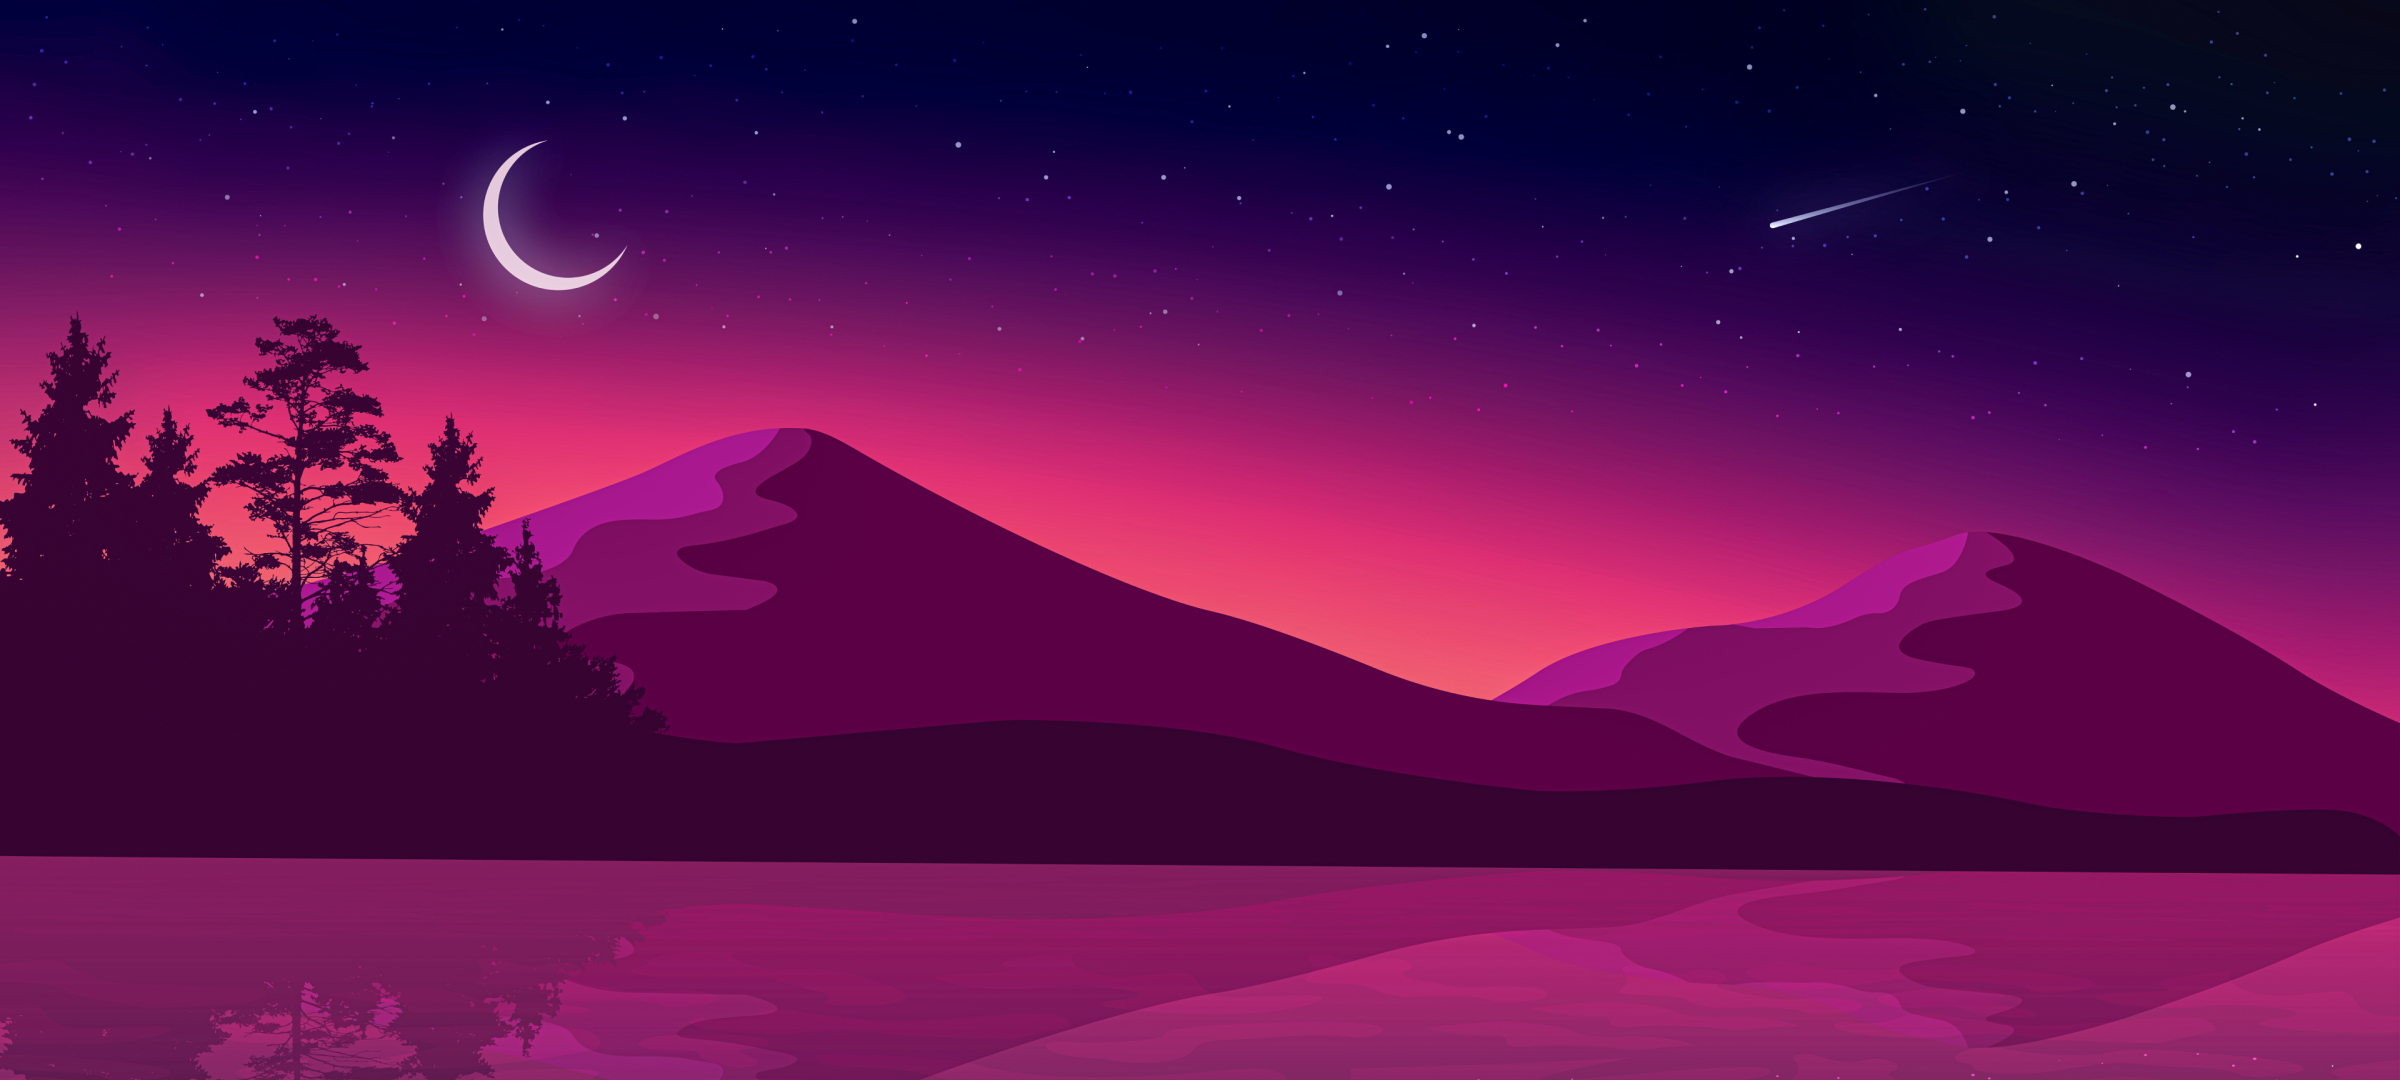 2400x1080 The Final Night HD Illustrator 2400x1080 Resolution Wallpaper, HD  Artist 4K Wallpapers, Images, Photos and Background - Wallpapers Den